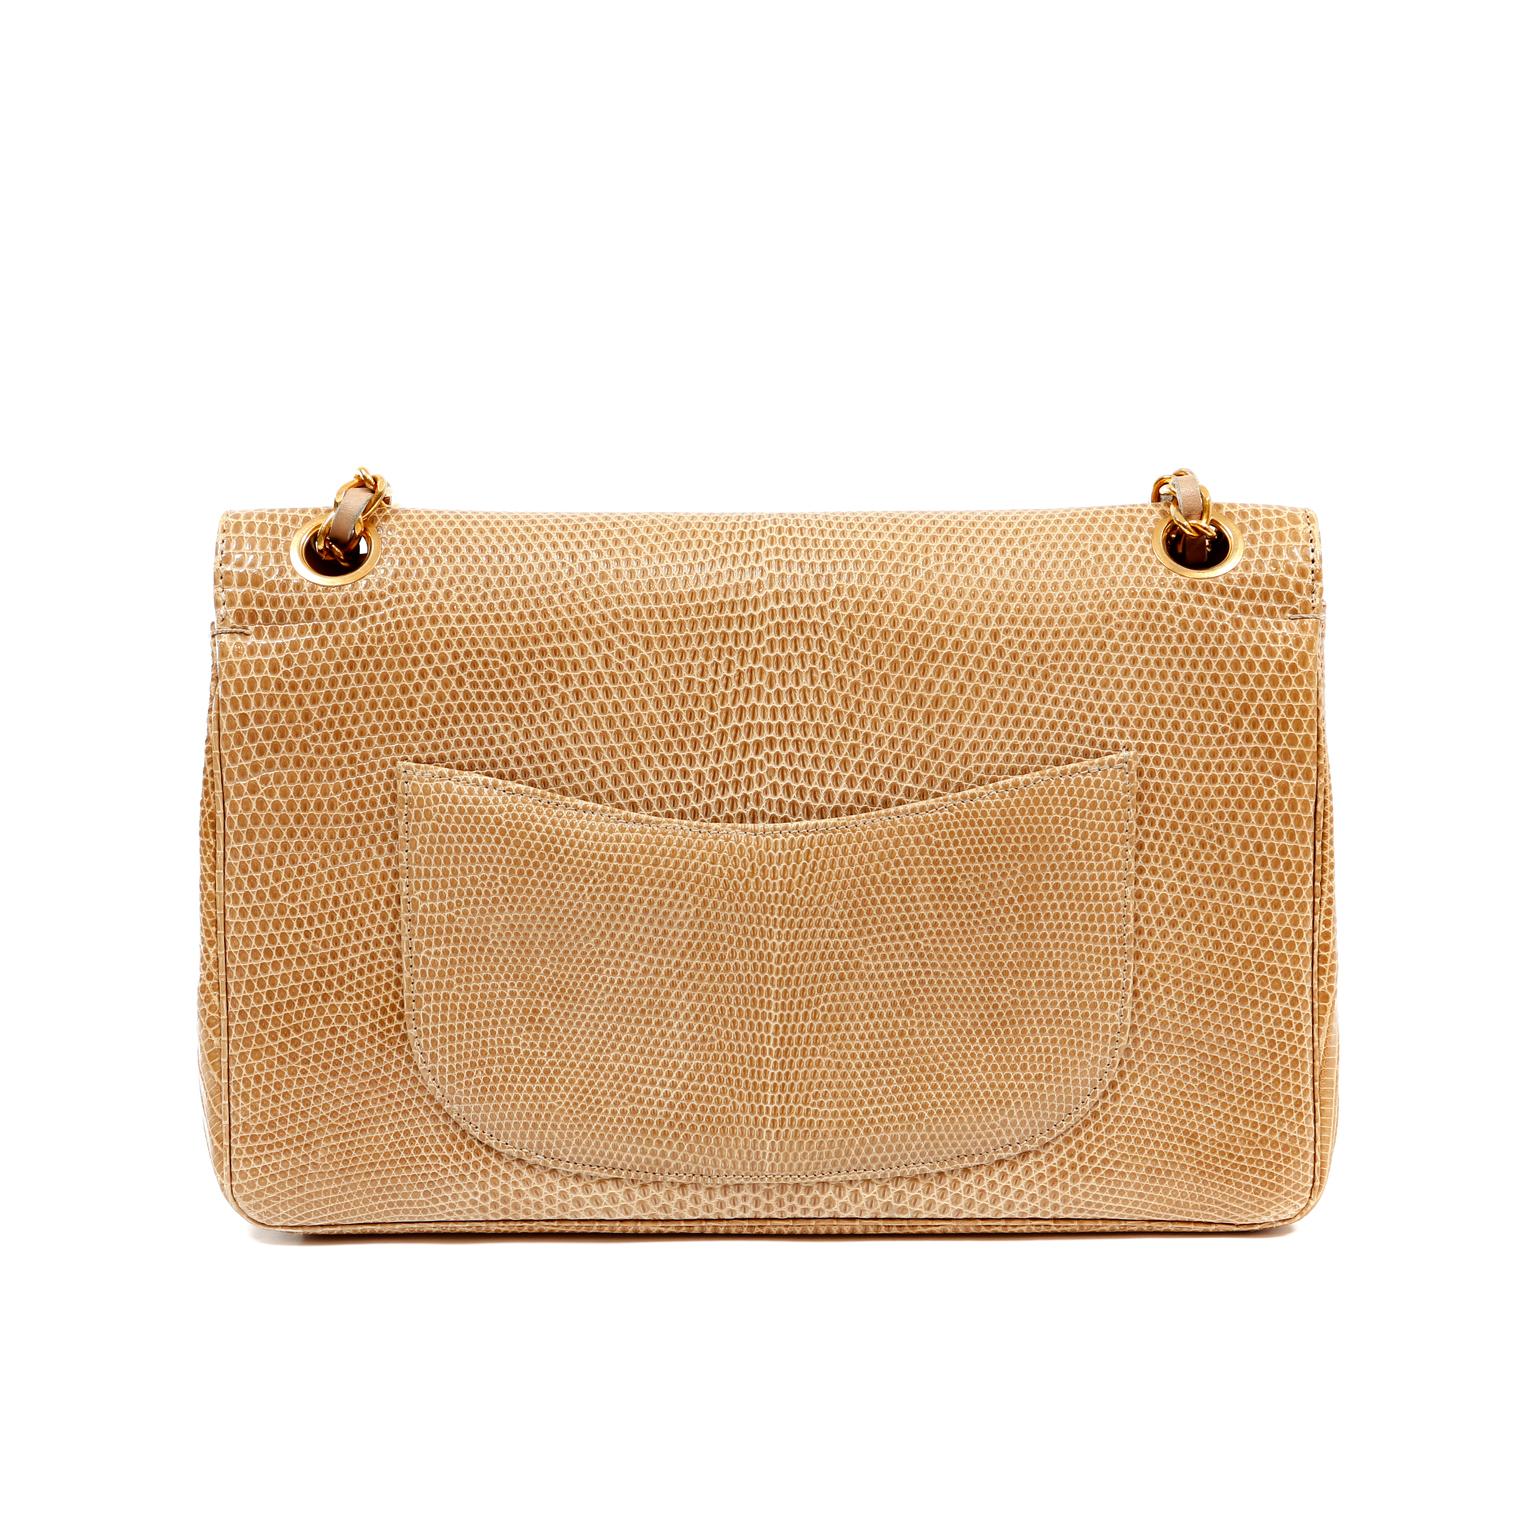 This authentic Chanel Beige Lizard Medium Classic Flap is in excellent vintage condition.  It has enjoyed a previous life and may have some small imperfections. Lizard is a highly collectible exotic and considered quite rare.
Neutral beige lizard